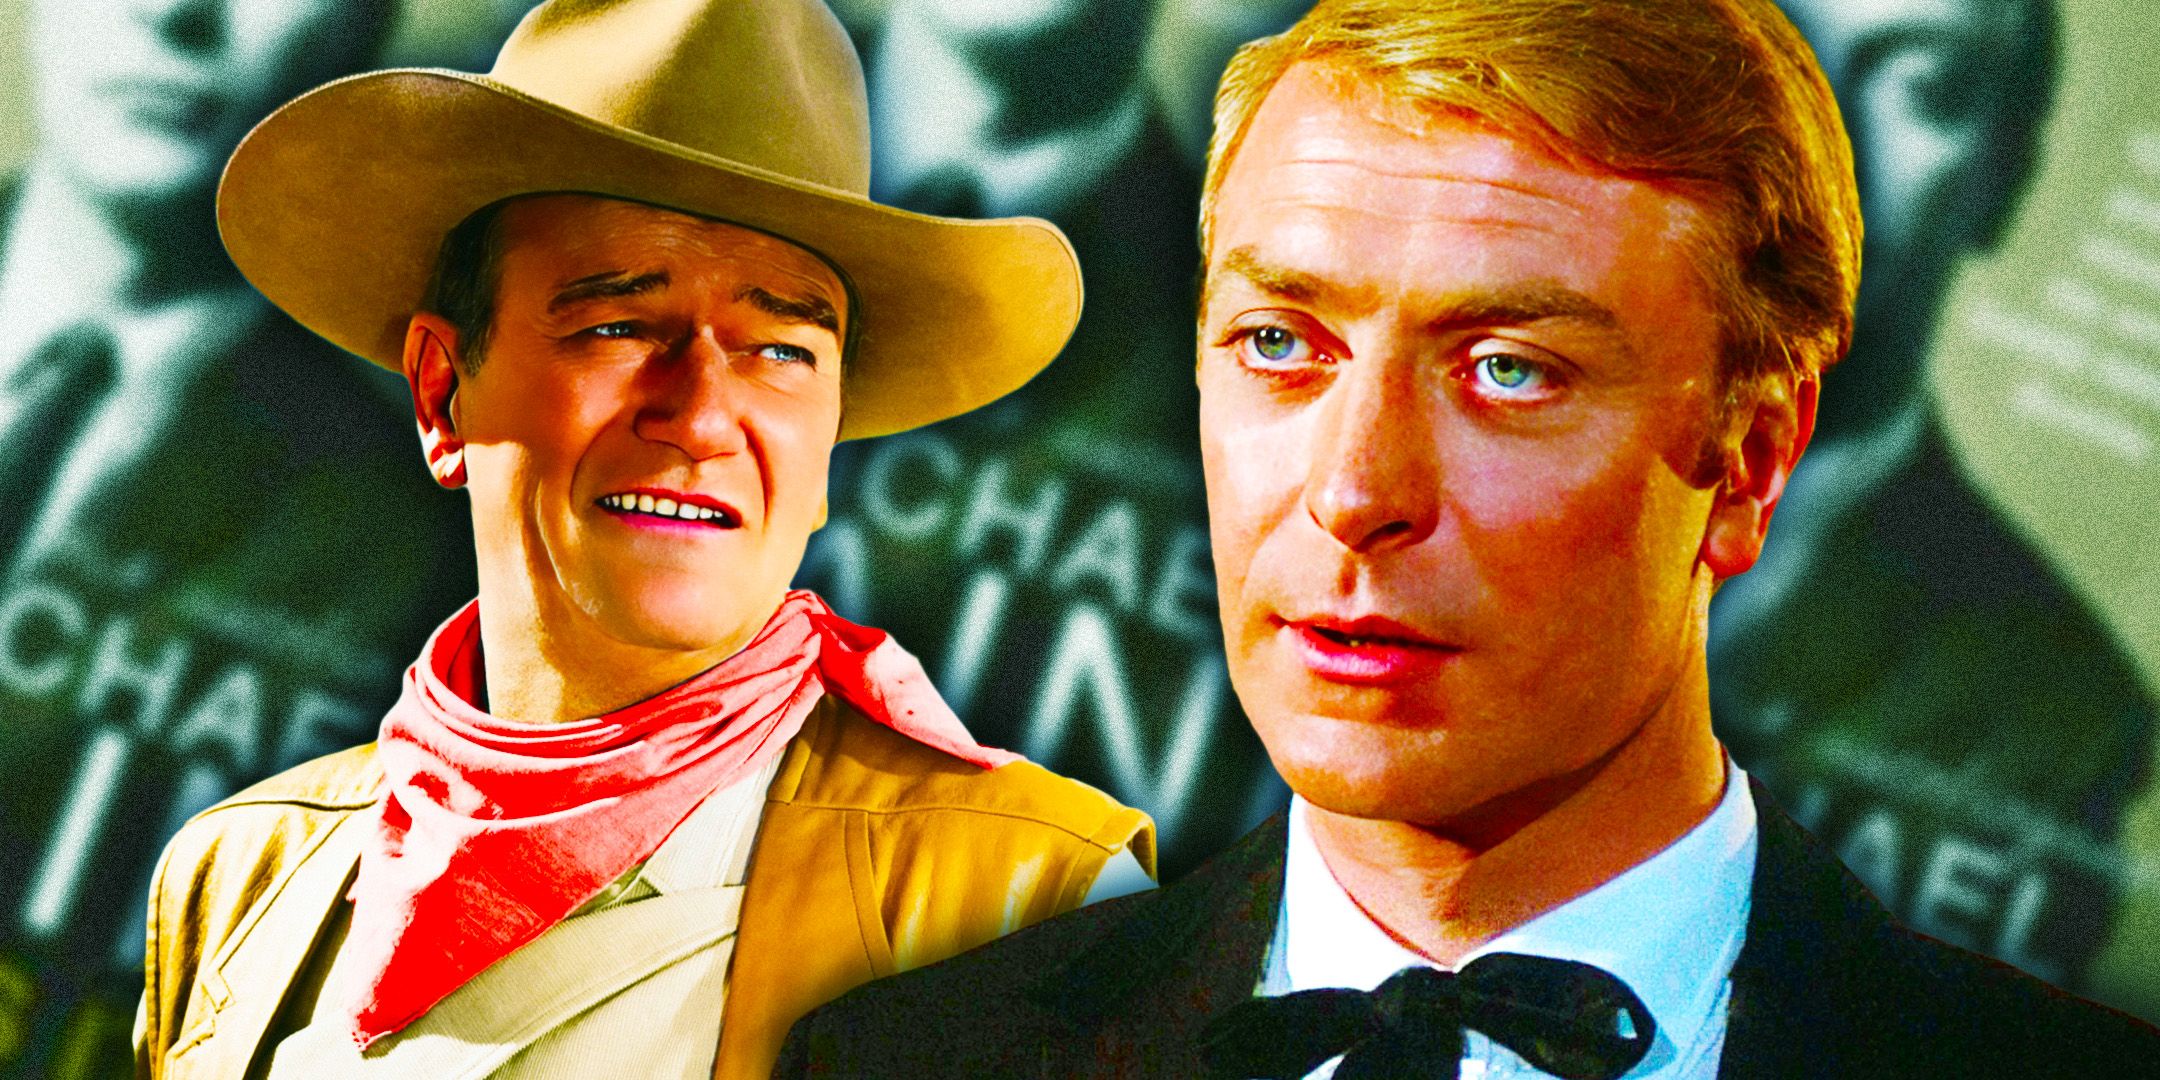 The Two Pieces Of Career Advice John Wayne Gave Michael Caine